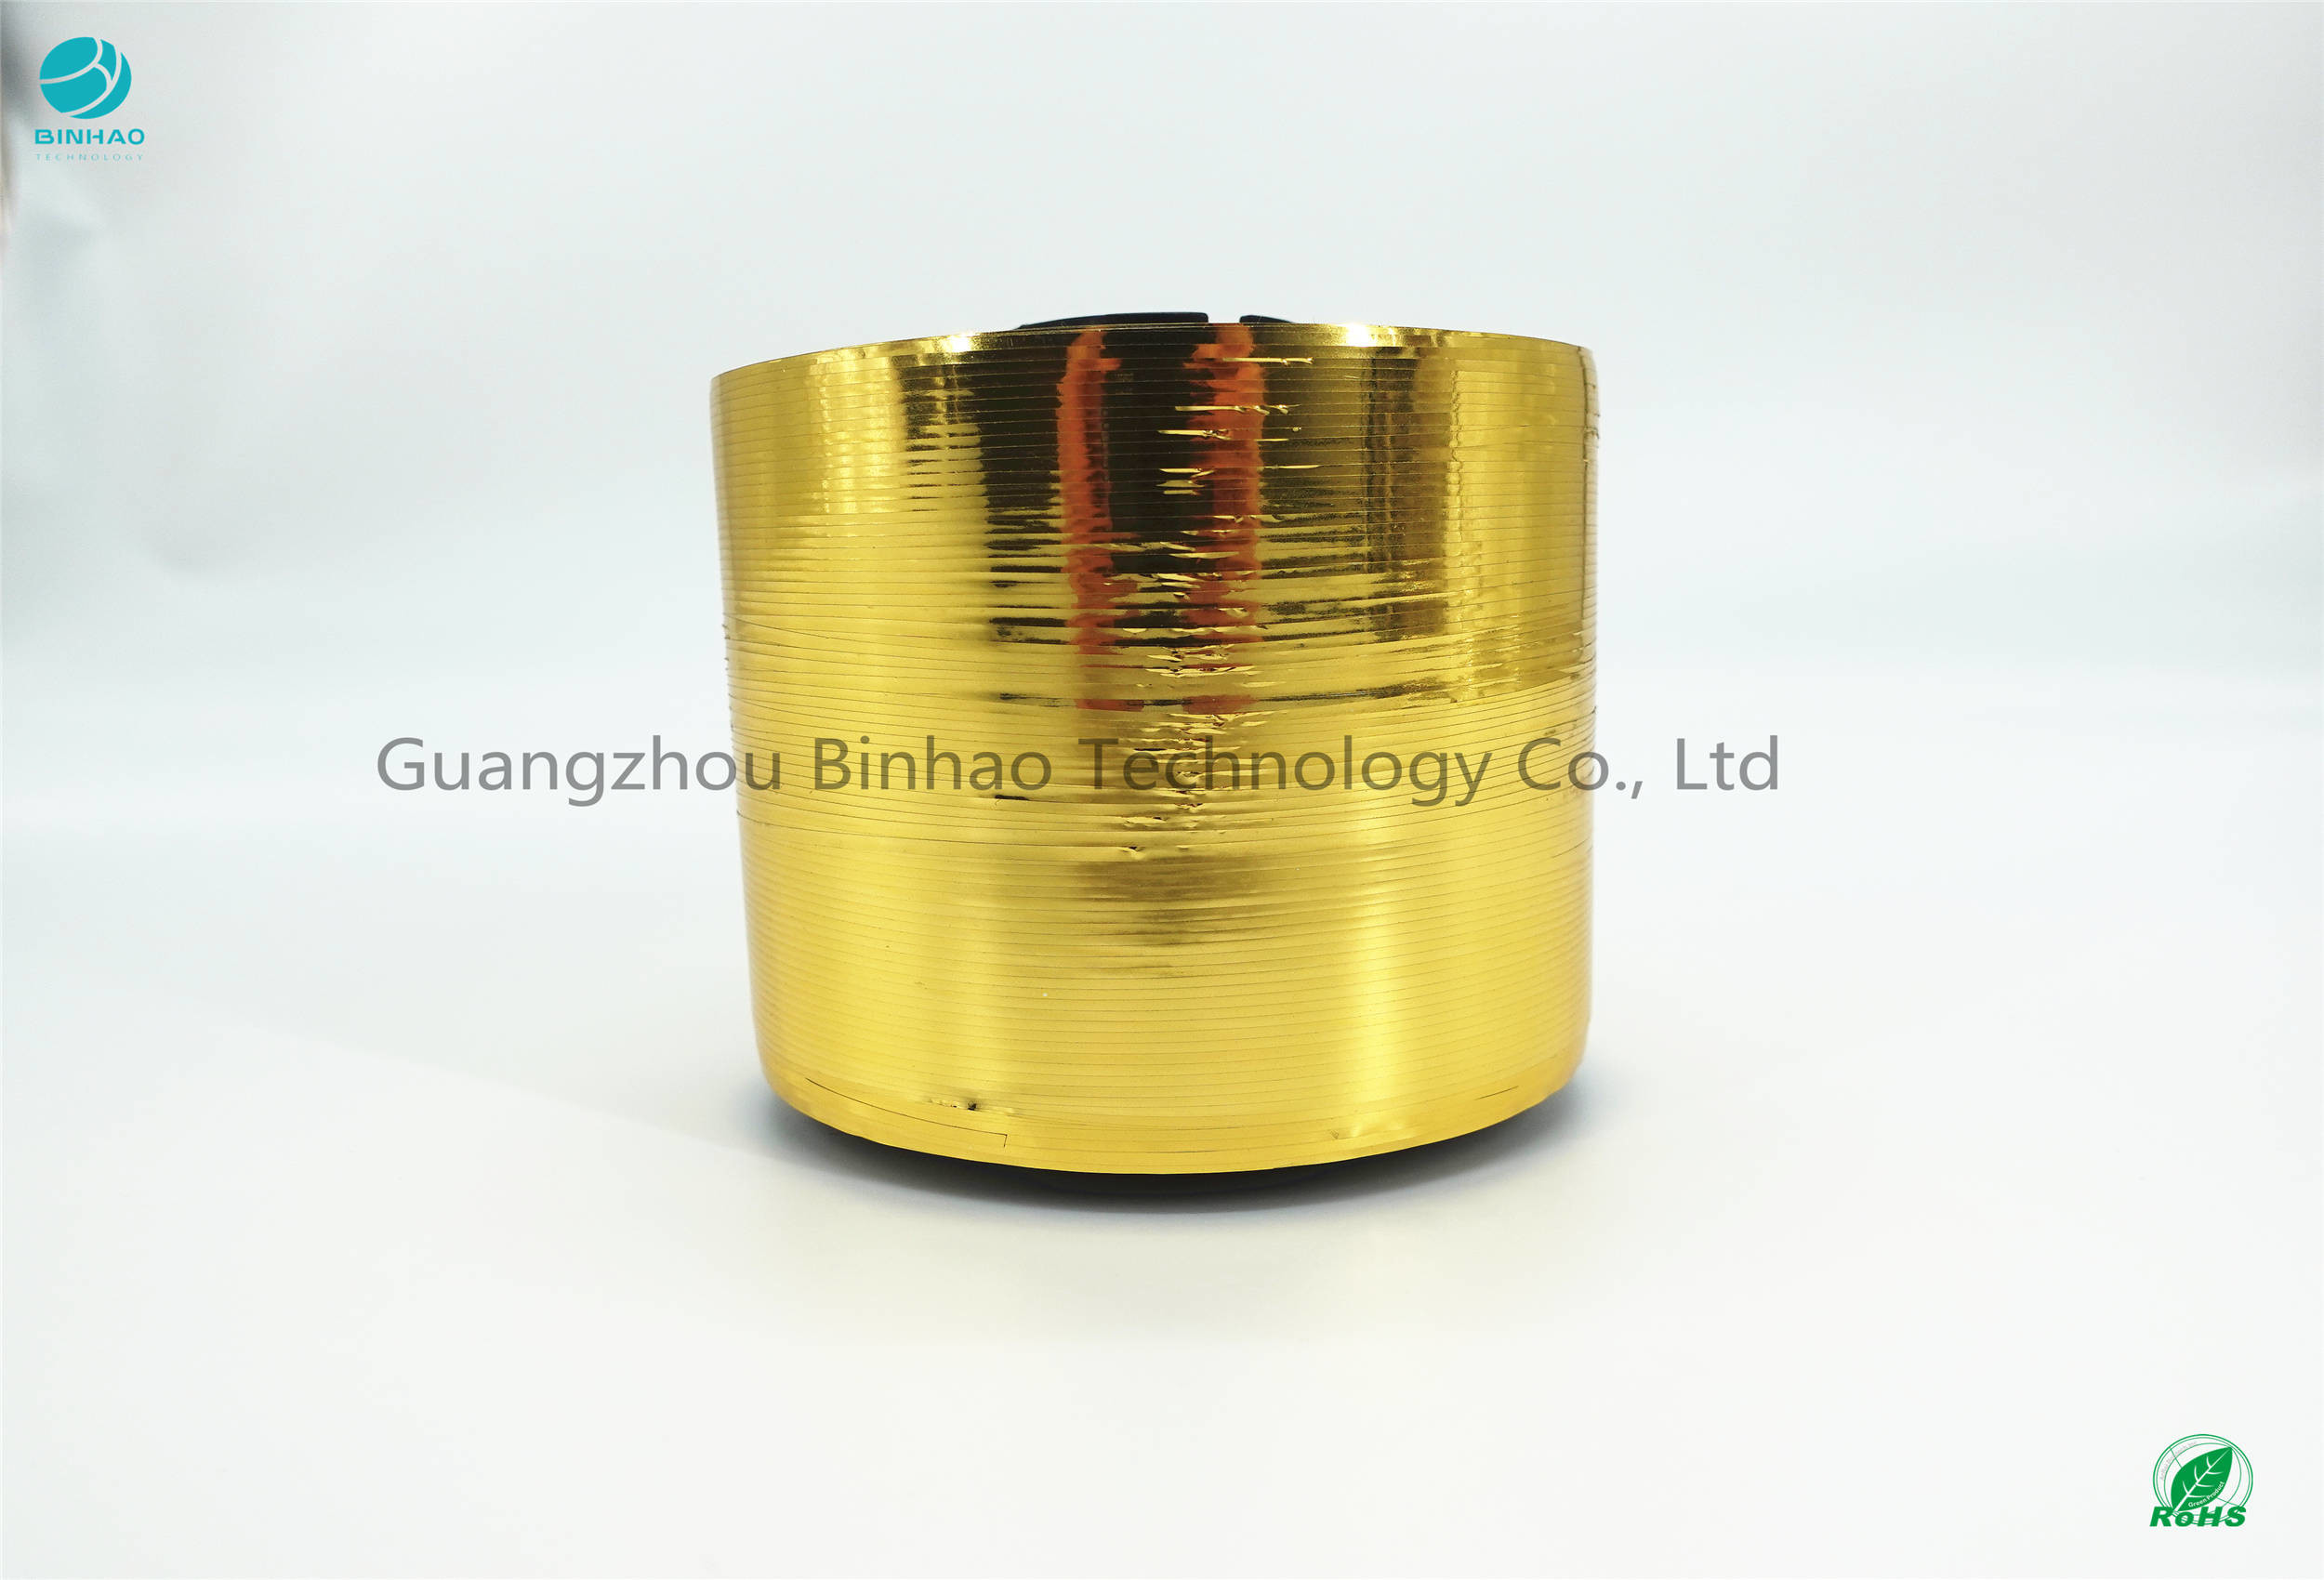 Gold Shining Adhesive Shiny Tear Tape Strip Easy Open Feature BOPP Normal Materials